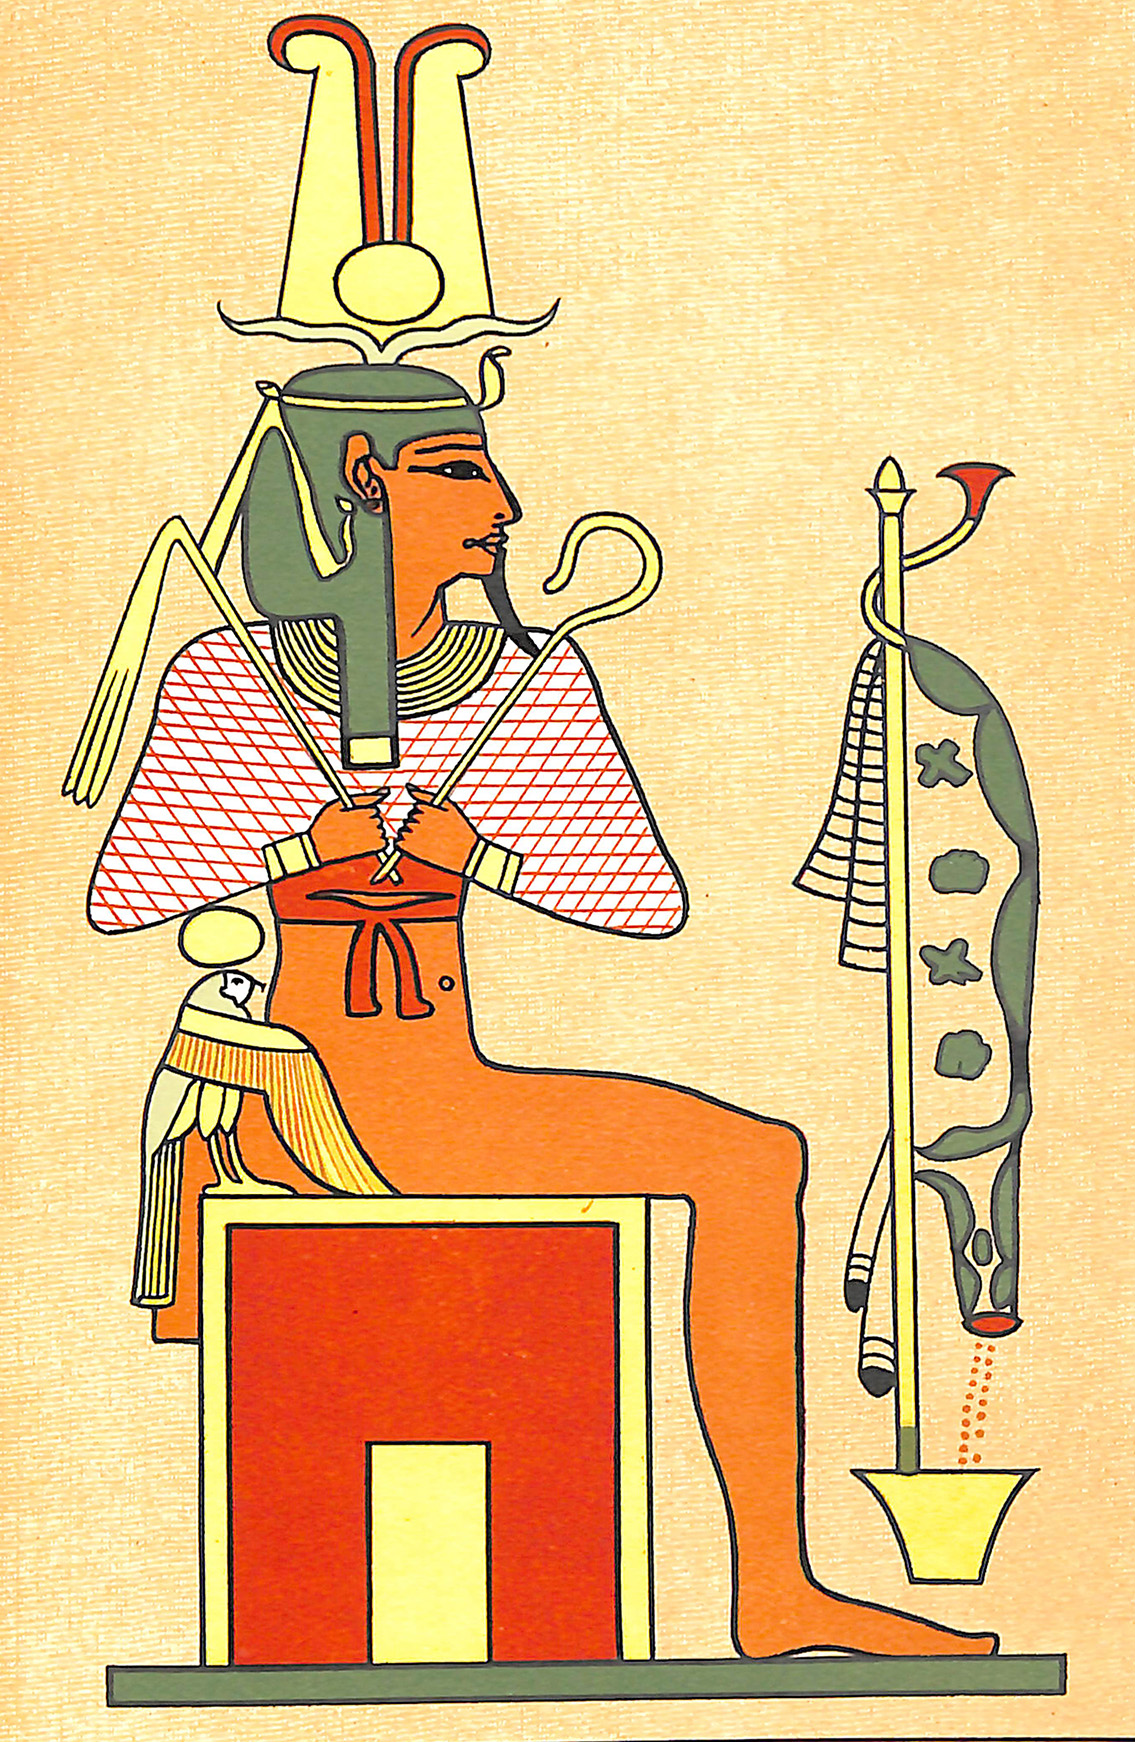 Ptah-Seker-Ausar, The Triune God of the Ressurrection